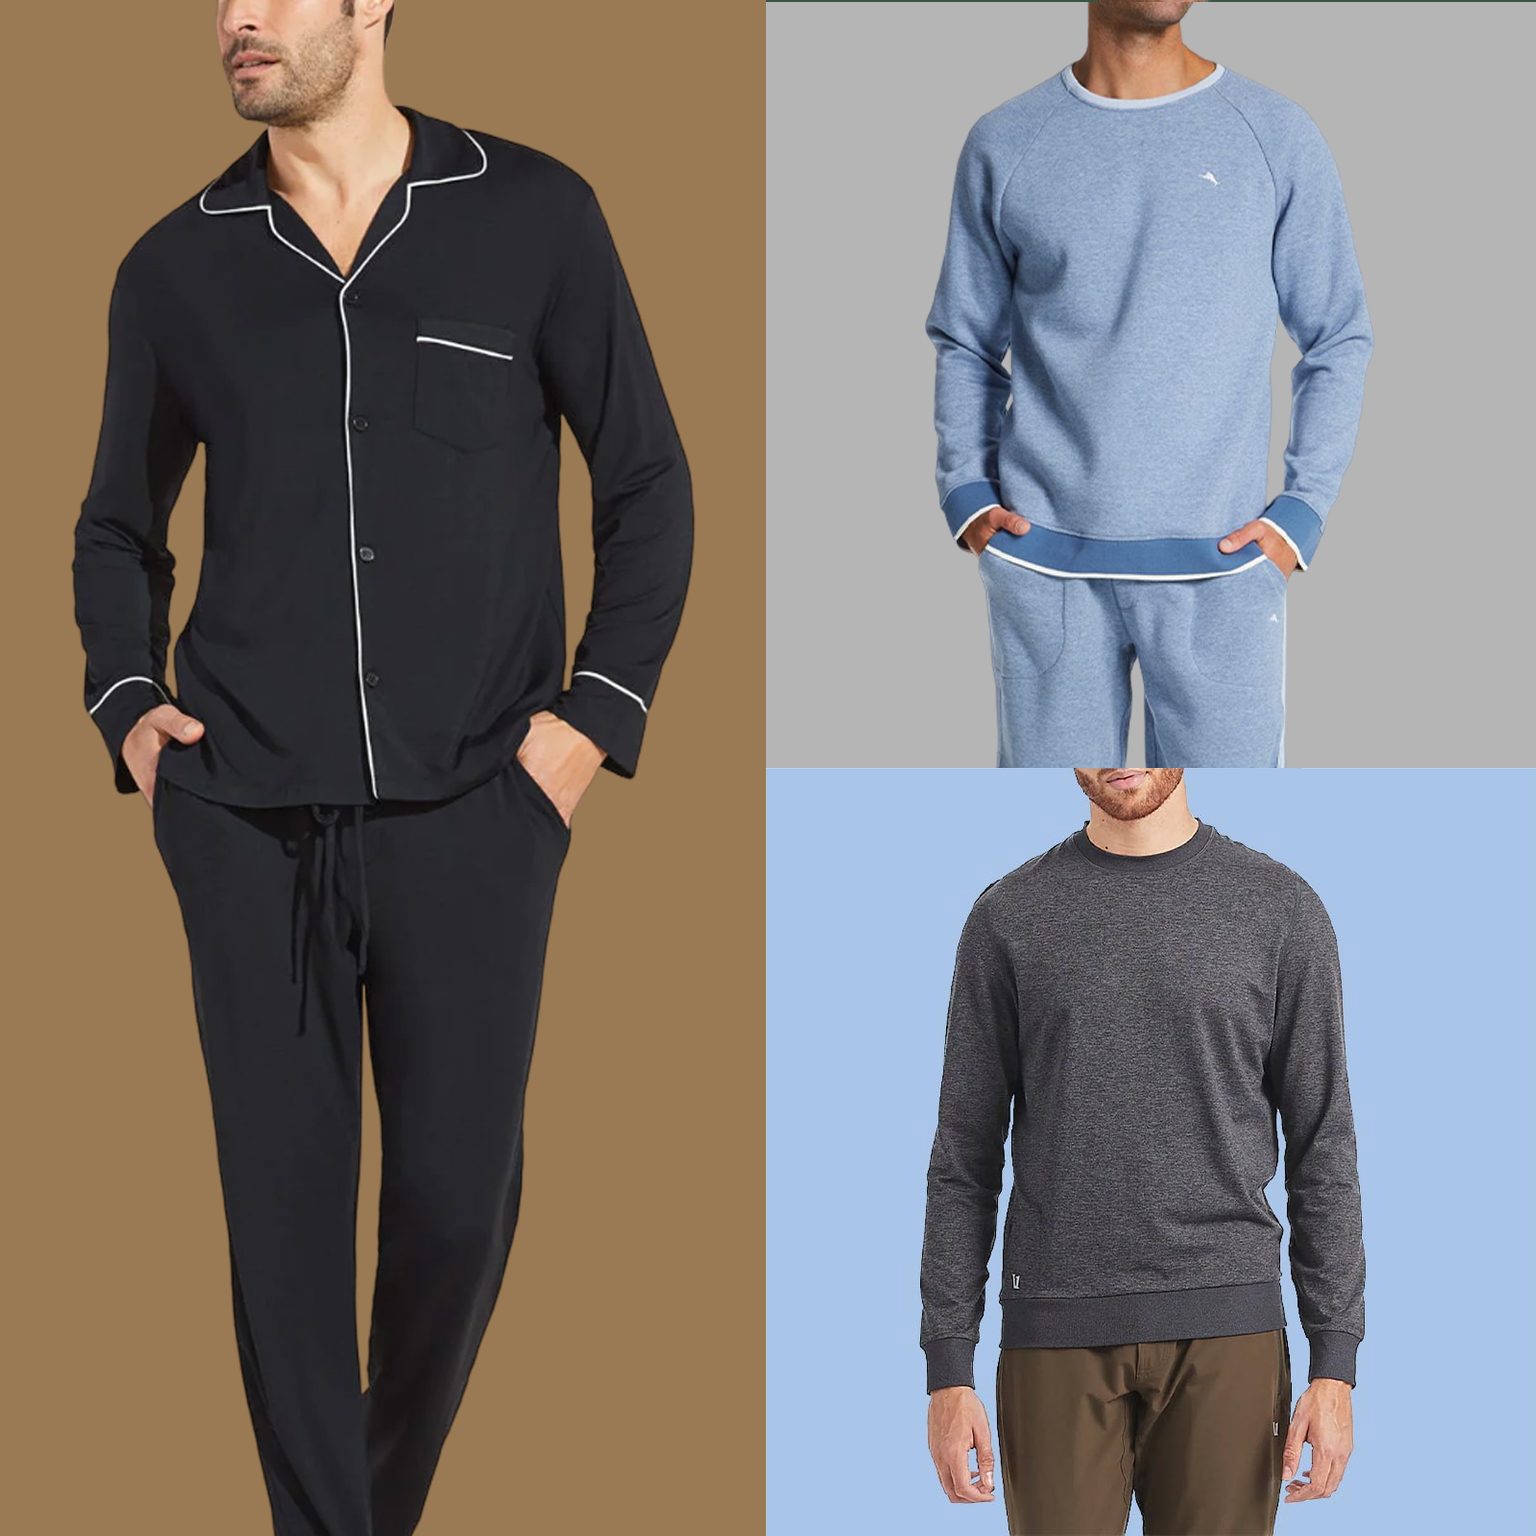 Can pajamas really help you beat insomnia? – Tommy John